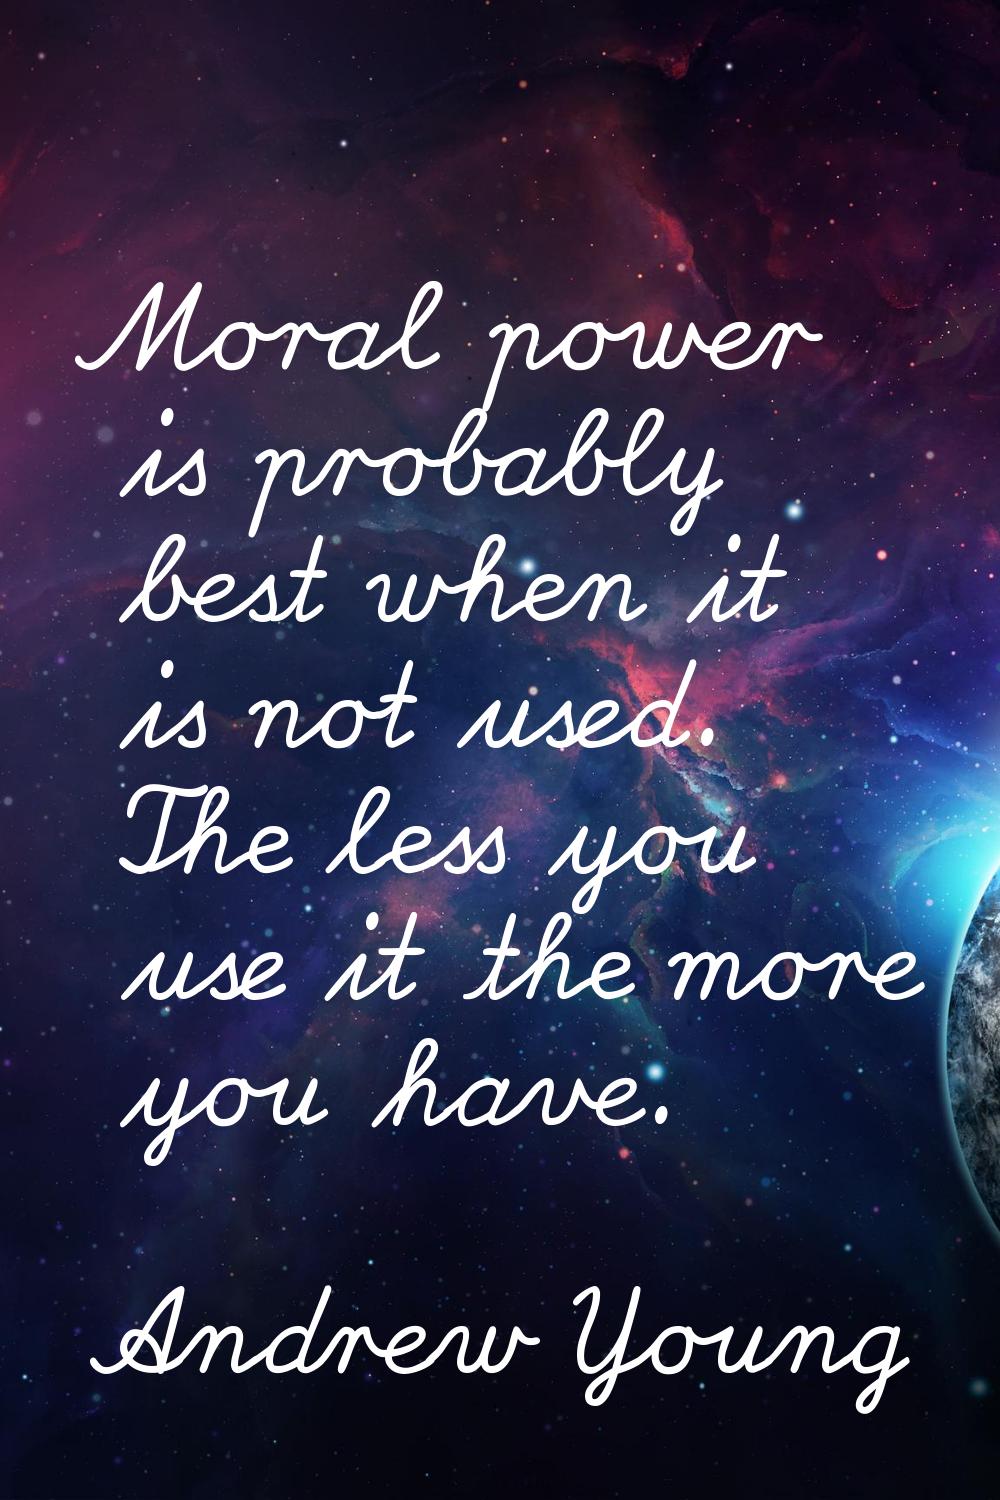 Moral power is probably best when it is not used. The less you use it the more you have.